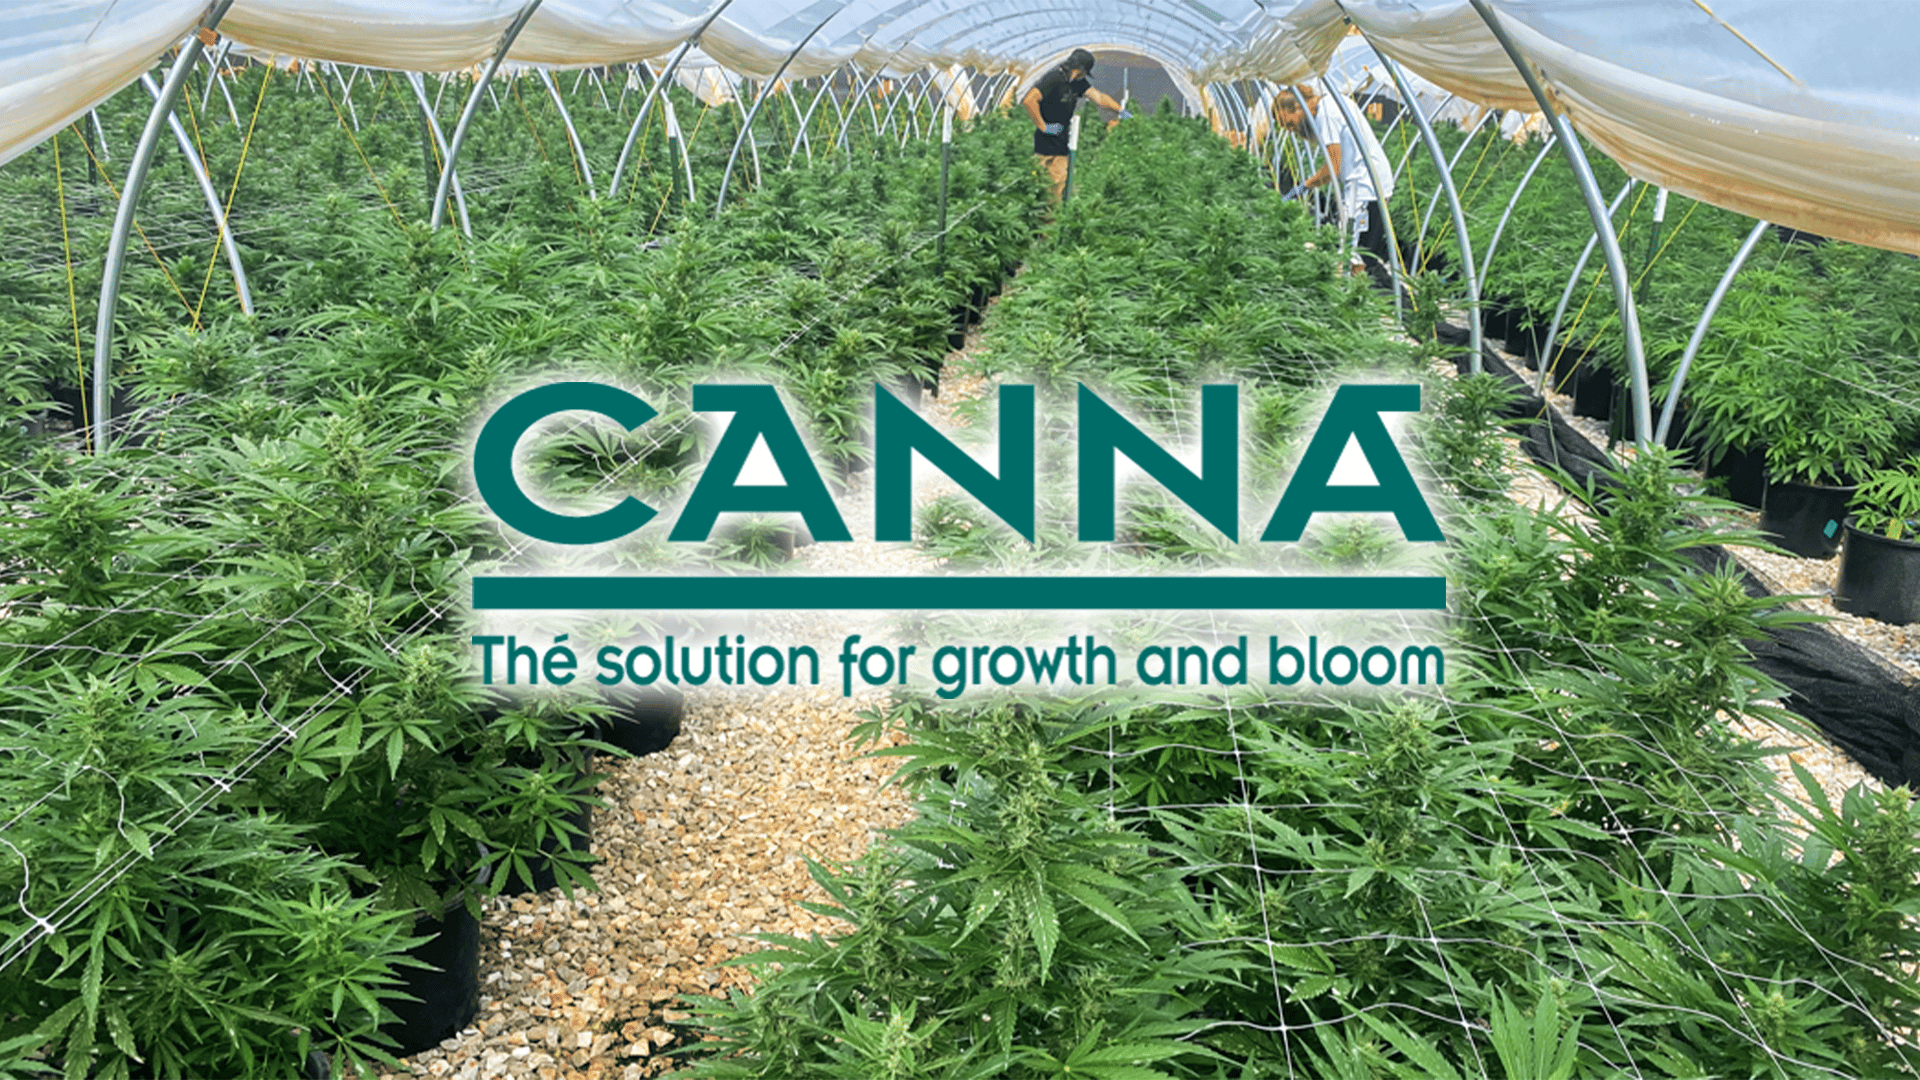 canna nutrients review, cannabis nutrients